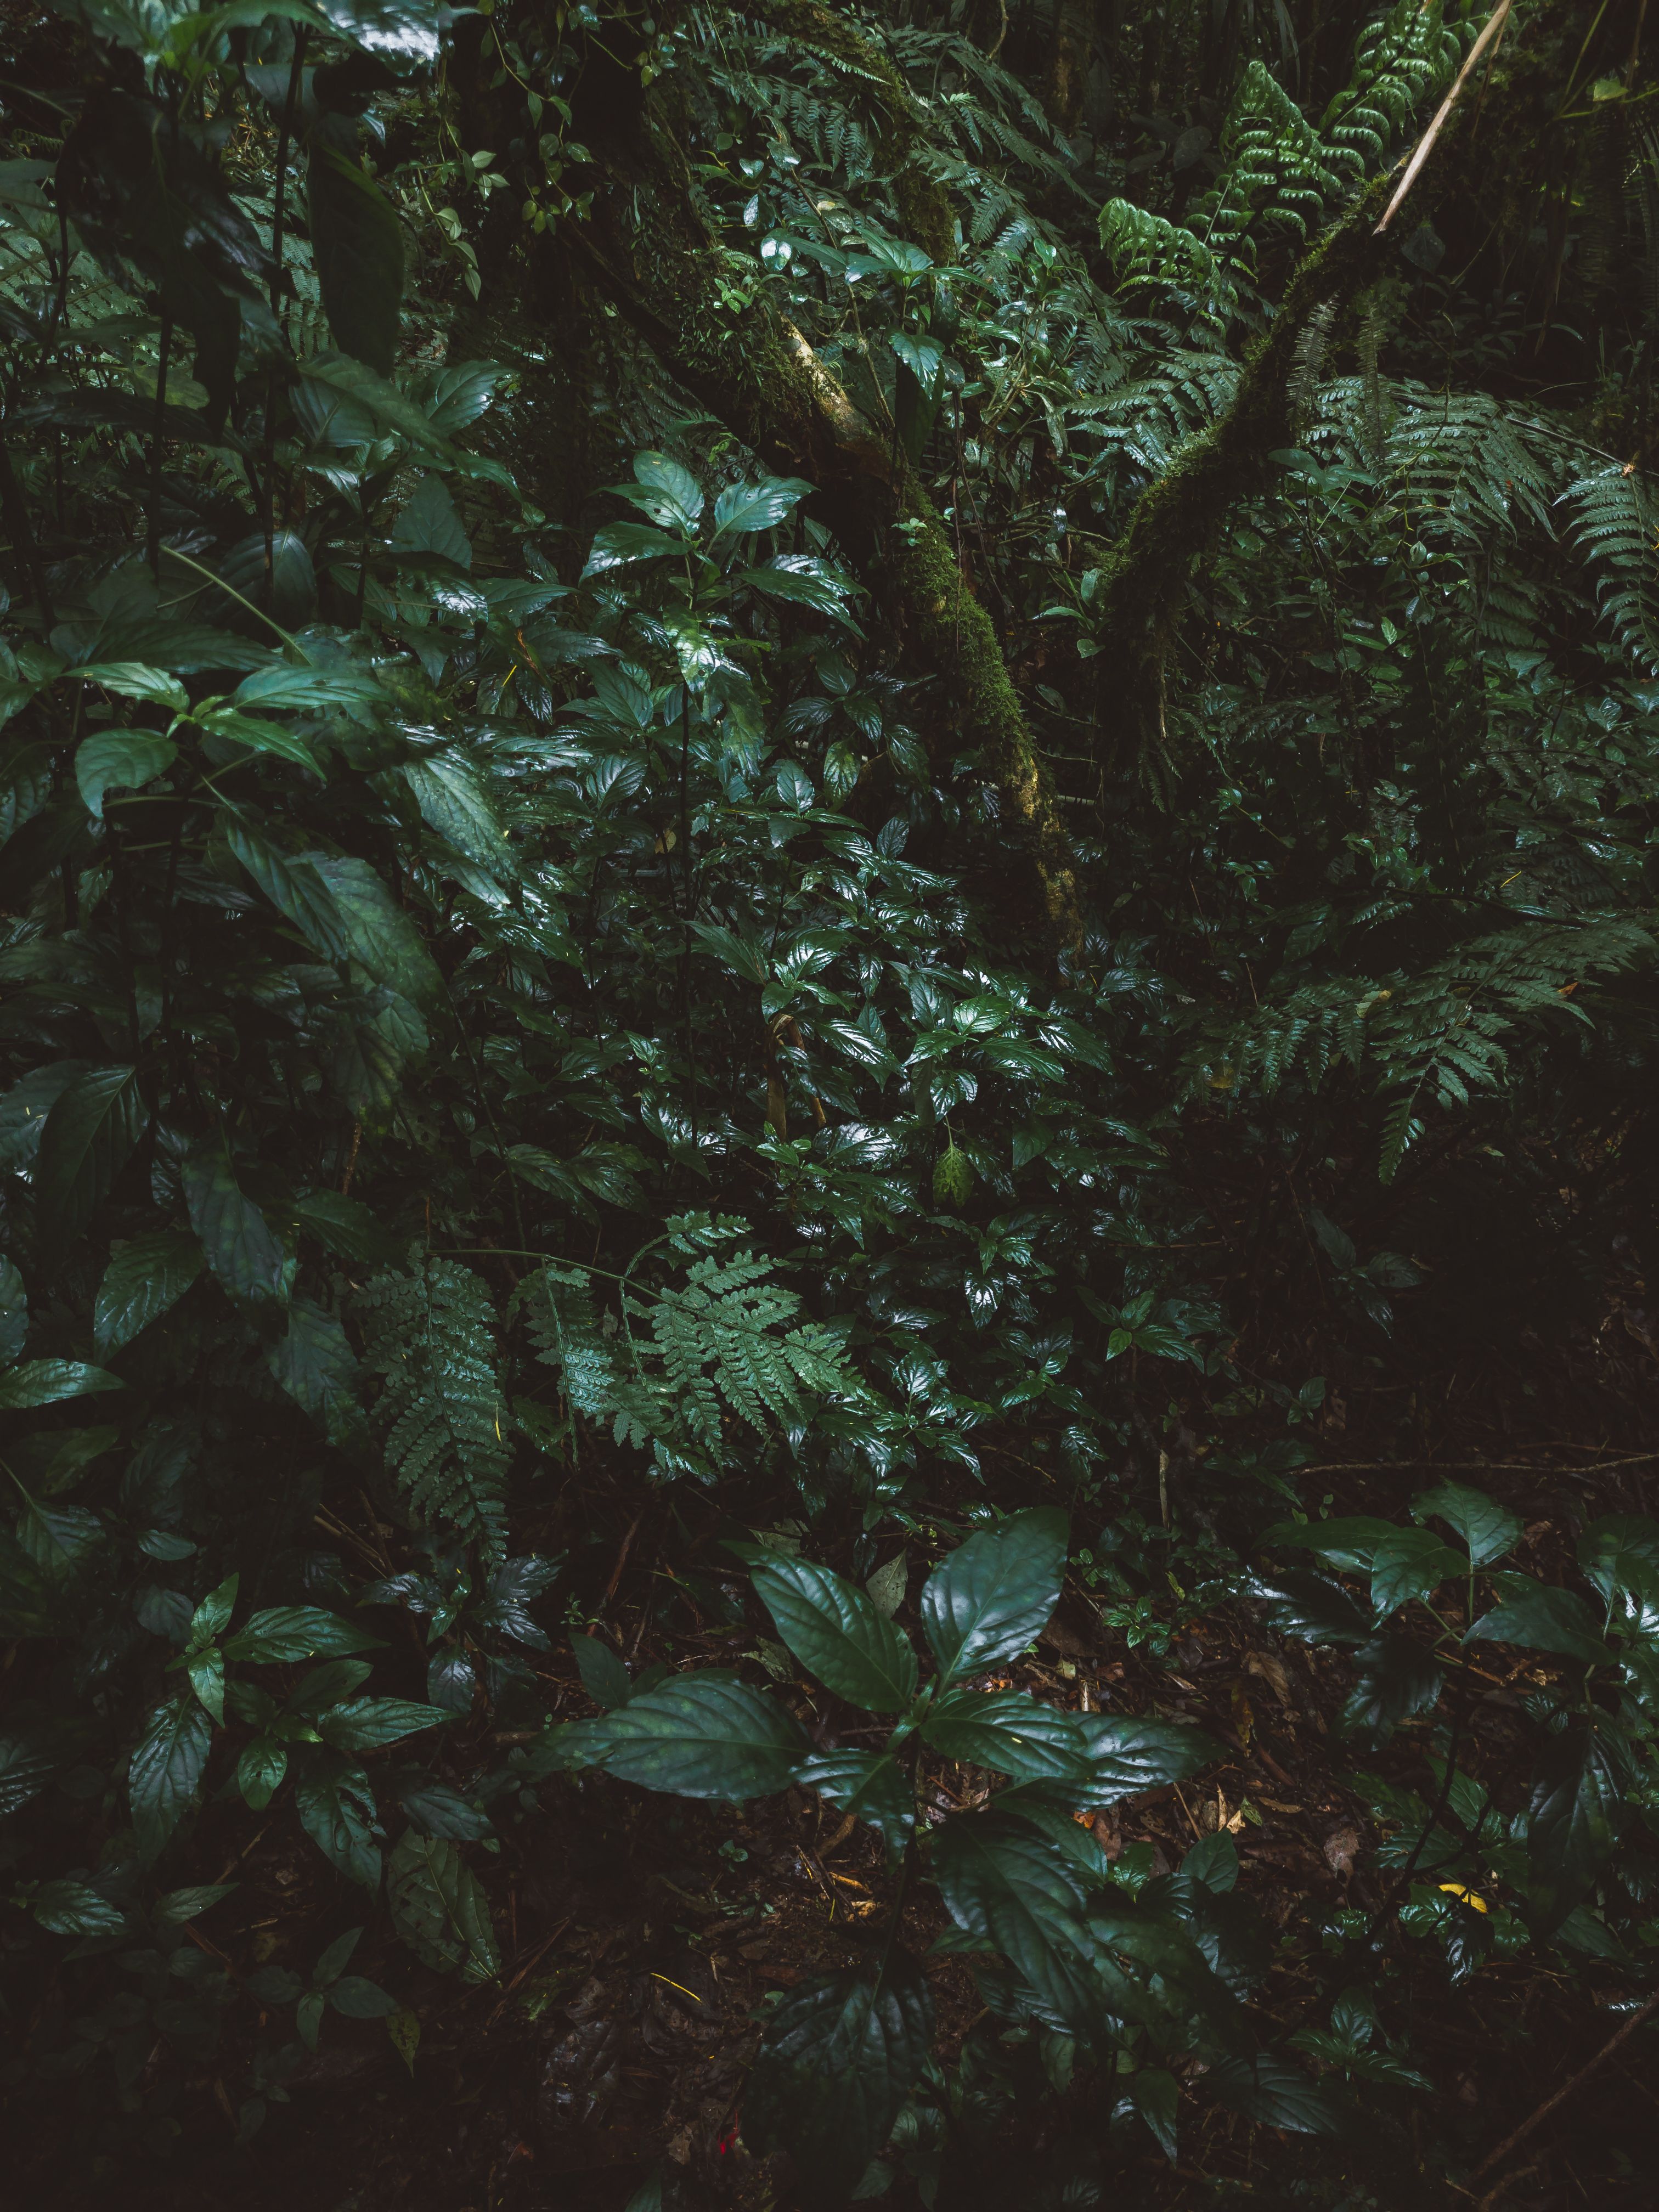 A dense forest floor with a mix of ferns and mosses. - Jungle